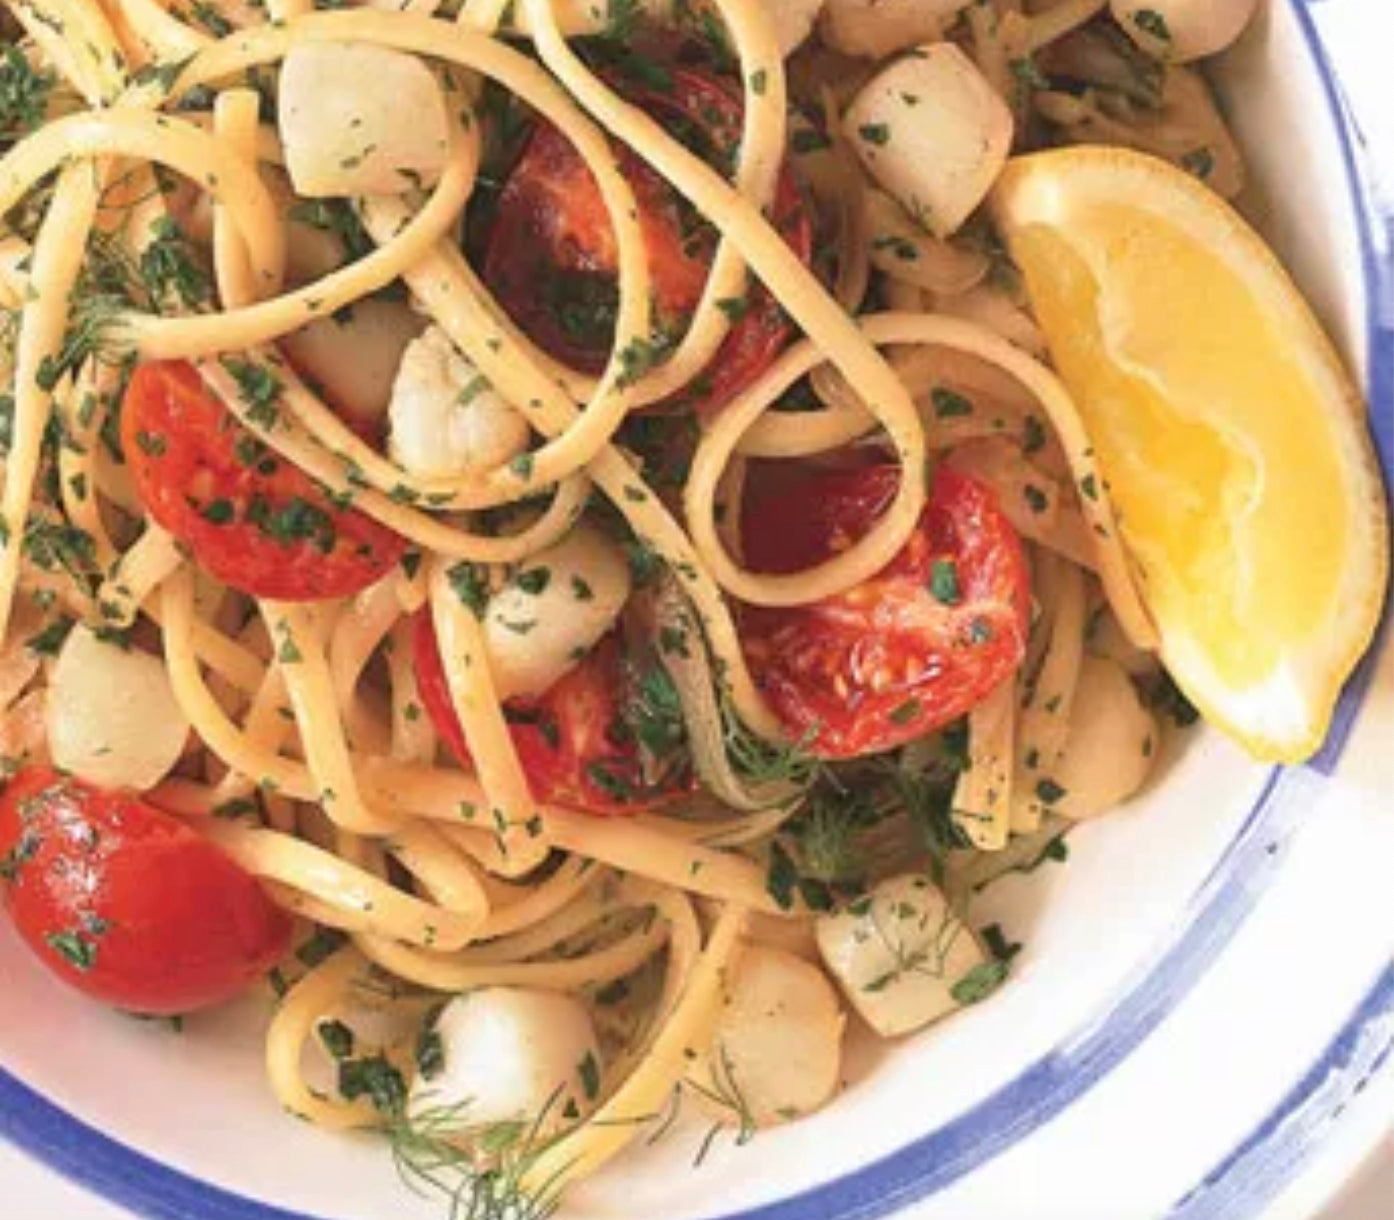 Linguine with Bay Scallops, Fennel, and Tomatoes